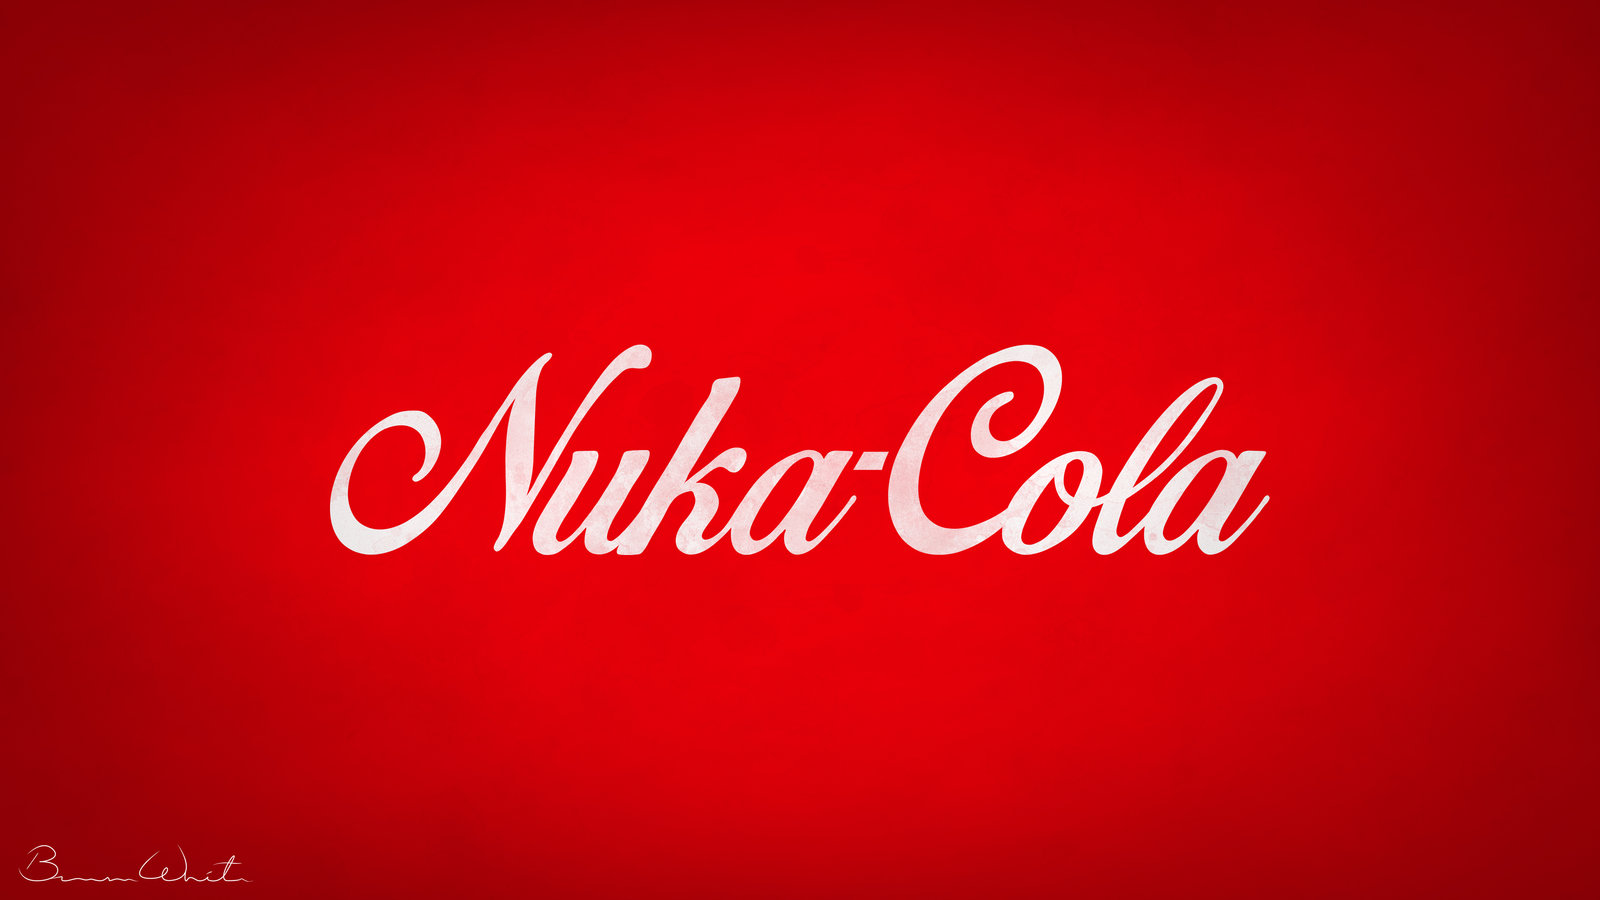 Nuka Cola Logo Redesign Wallpaper By Polygonbronson On